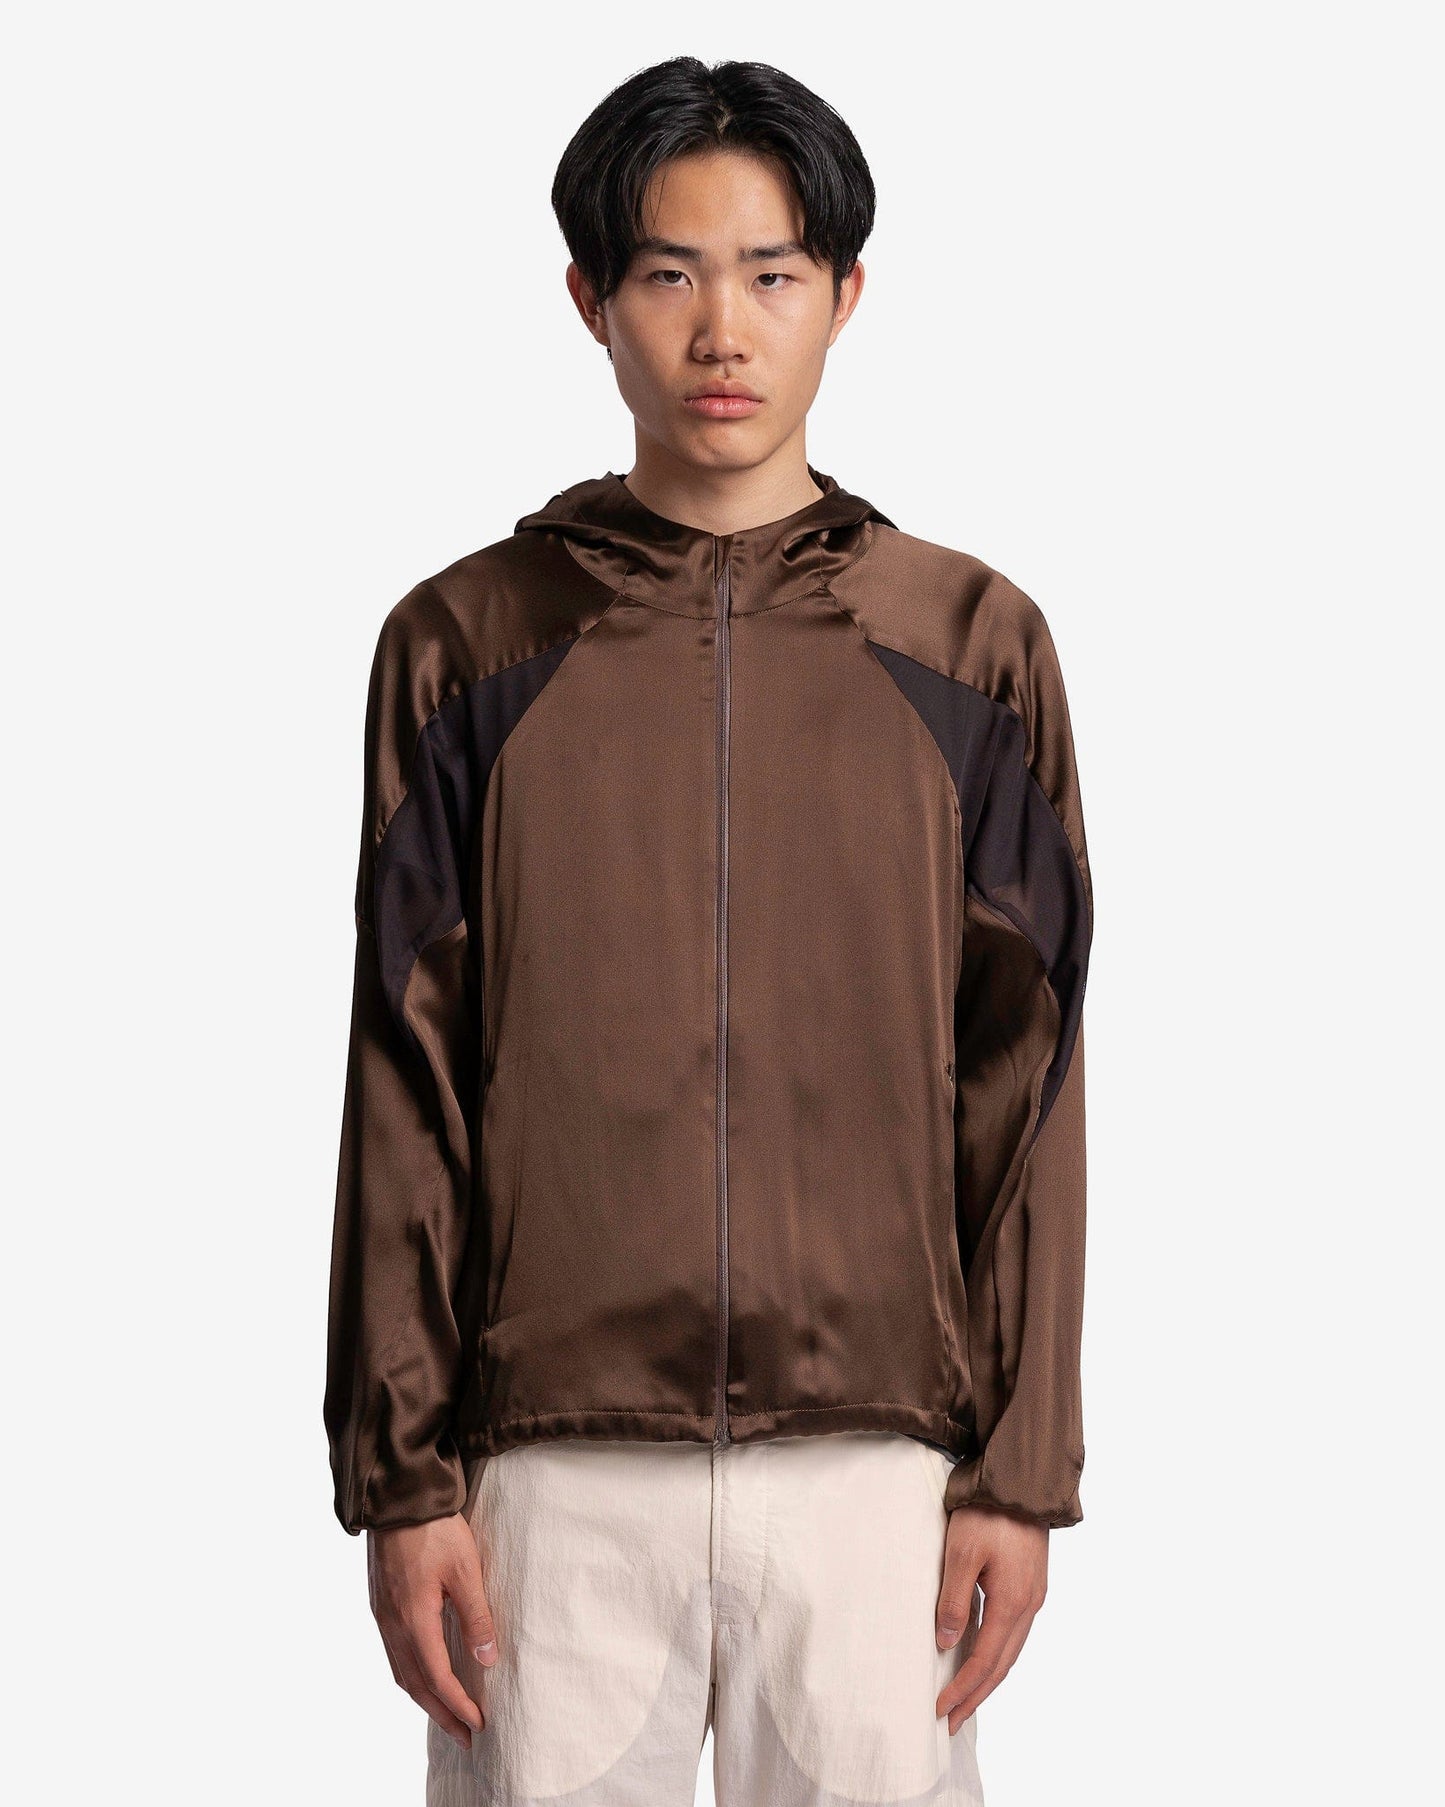 POST ARCHIVE FACTION (P.A.F) Men's Jackets 5.0+ Technical Jacket Right in Silk Brown